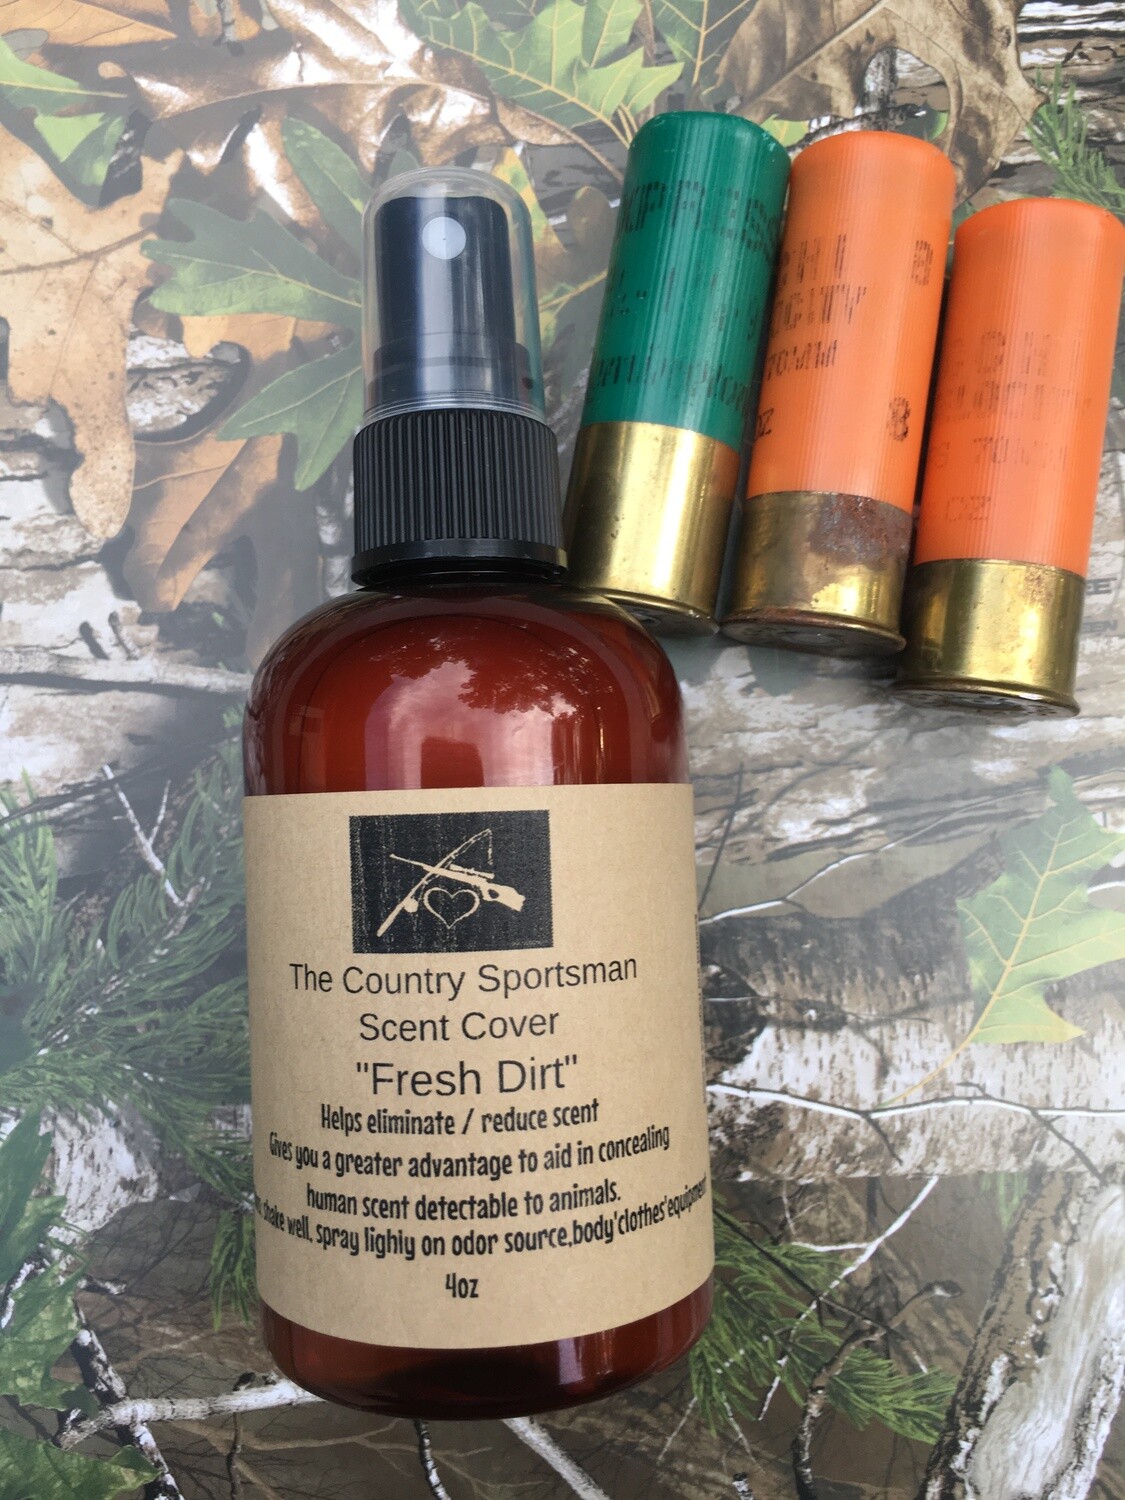 The Country Sportsman Scent Cover